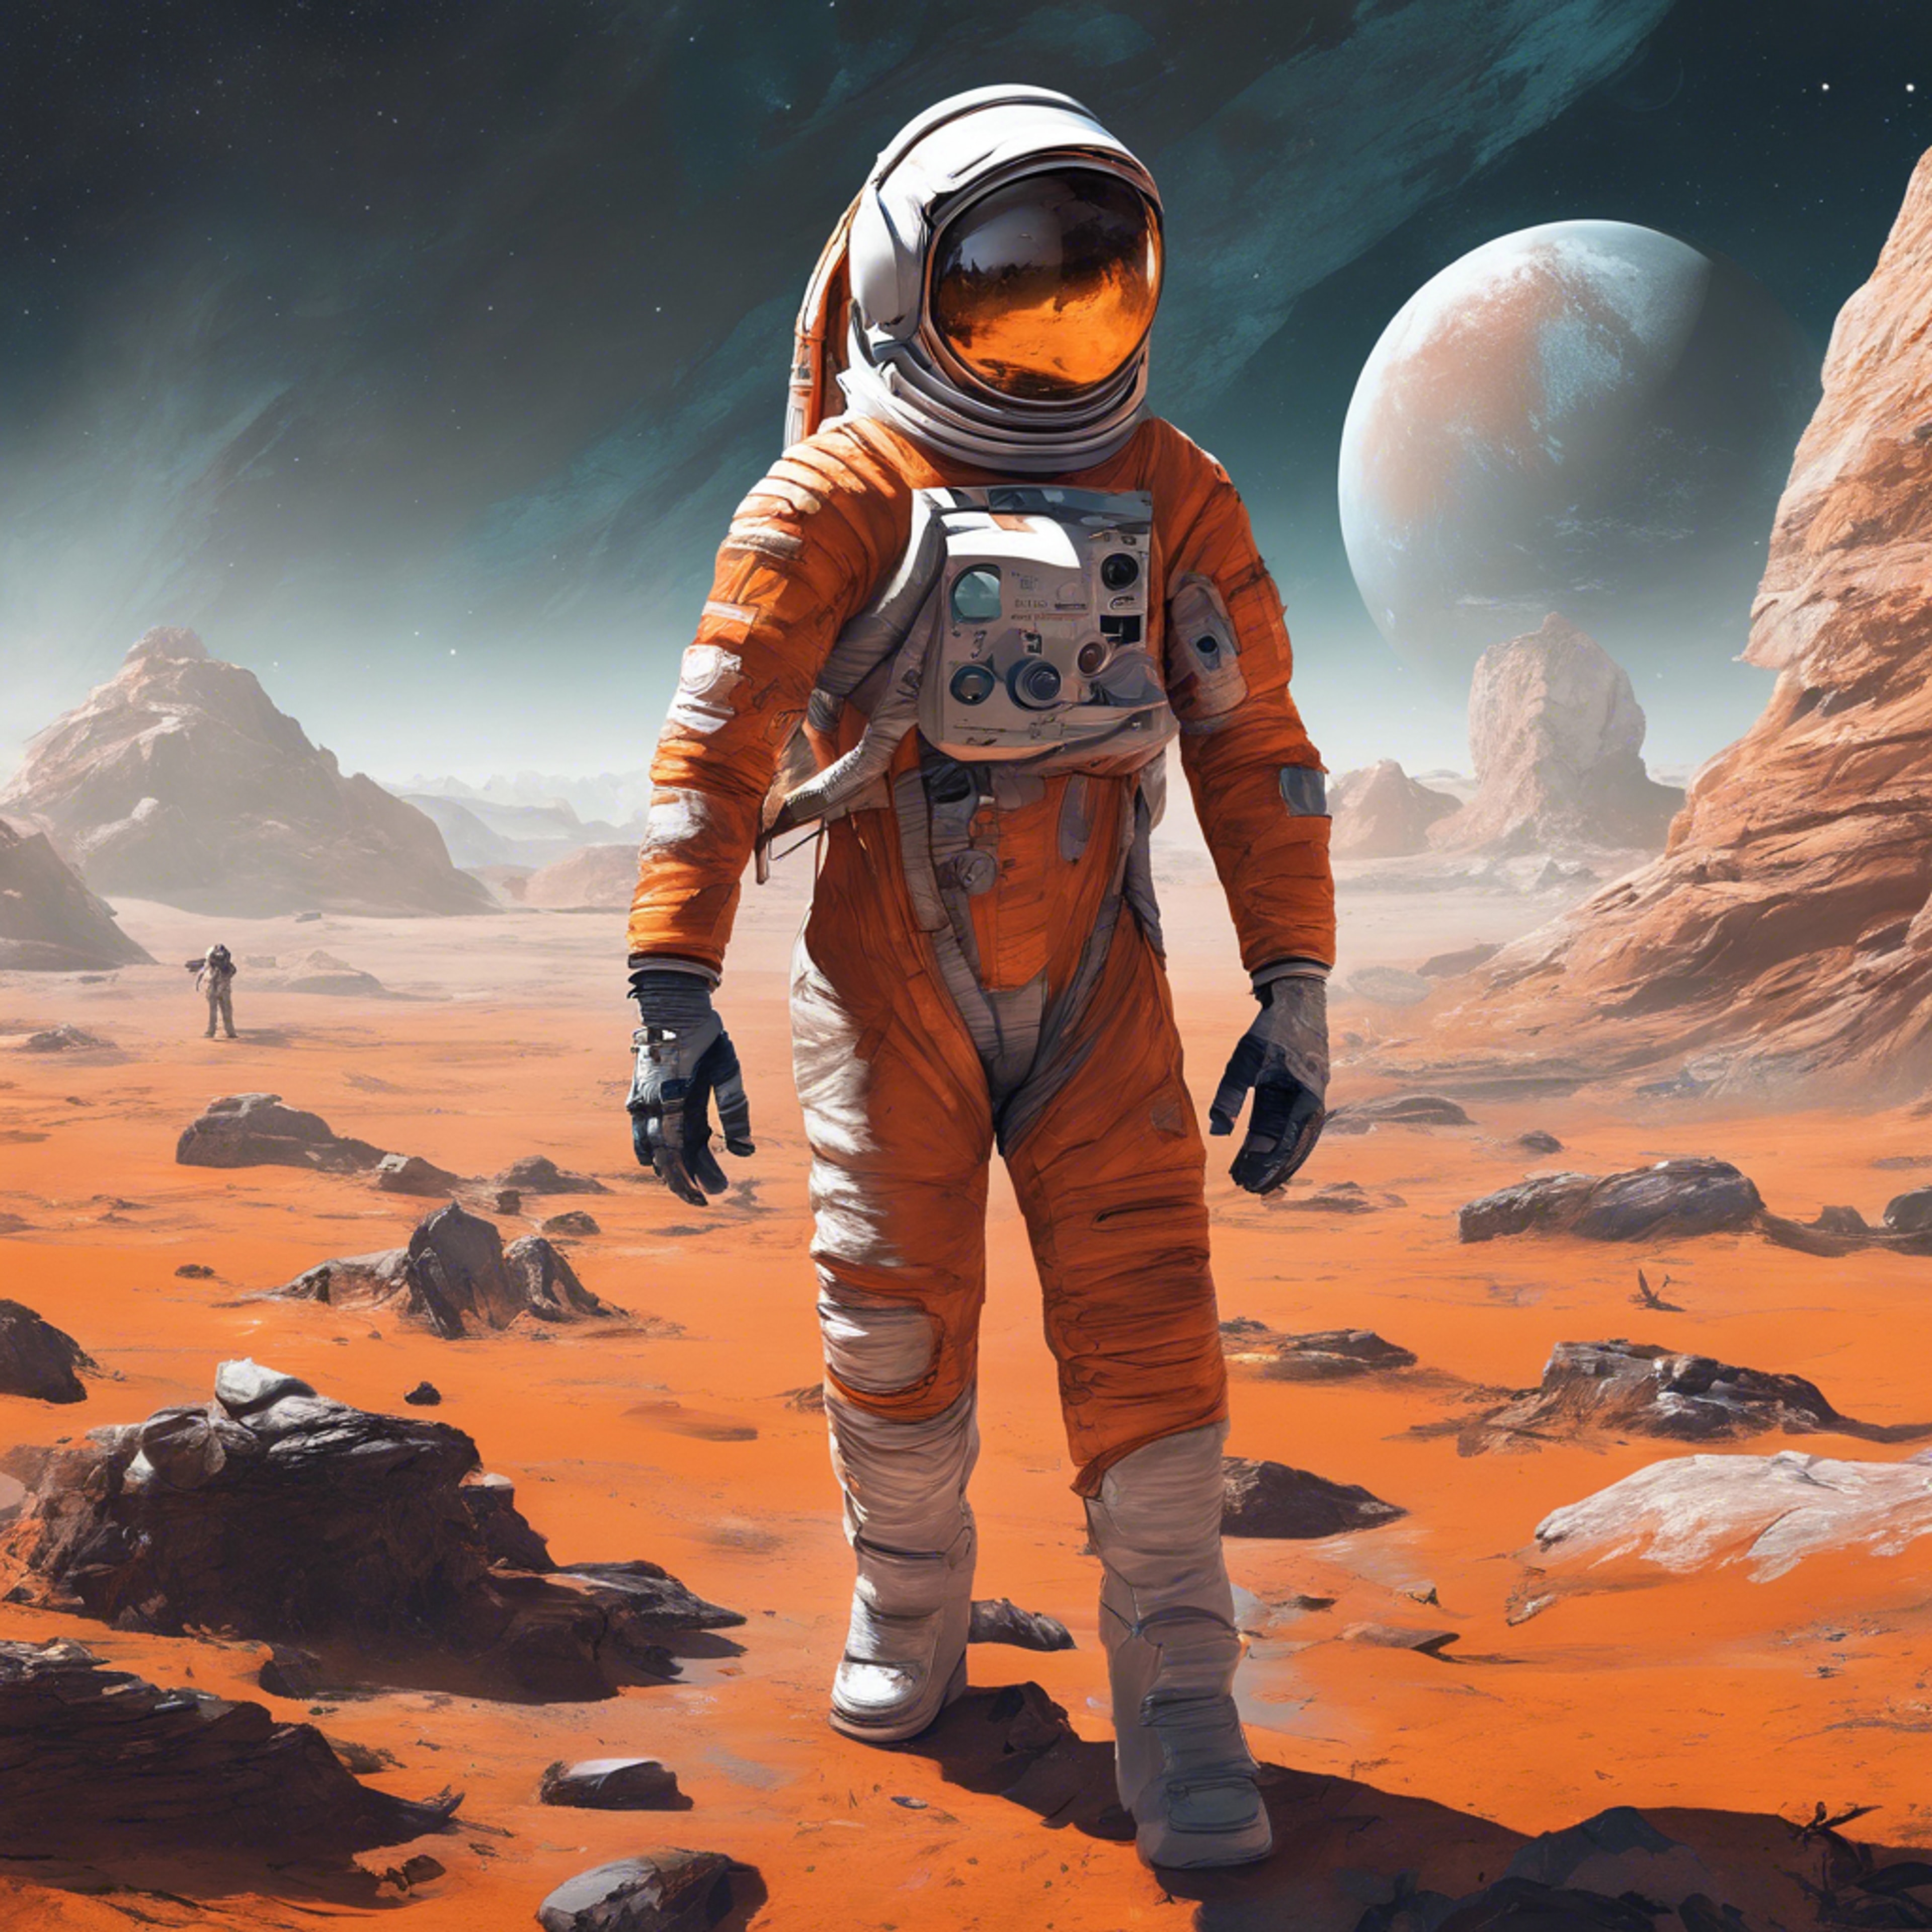 A space-themed video game featuring an astronaut in an orange and white suit exploring an alien planet. Tapet[5d2c49abc07a4c83ad01]